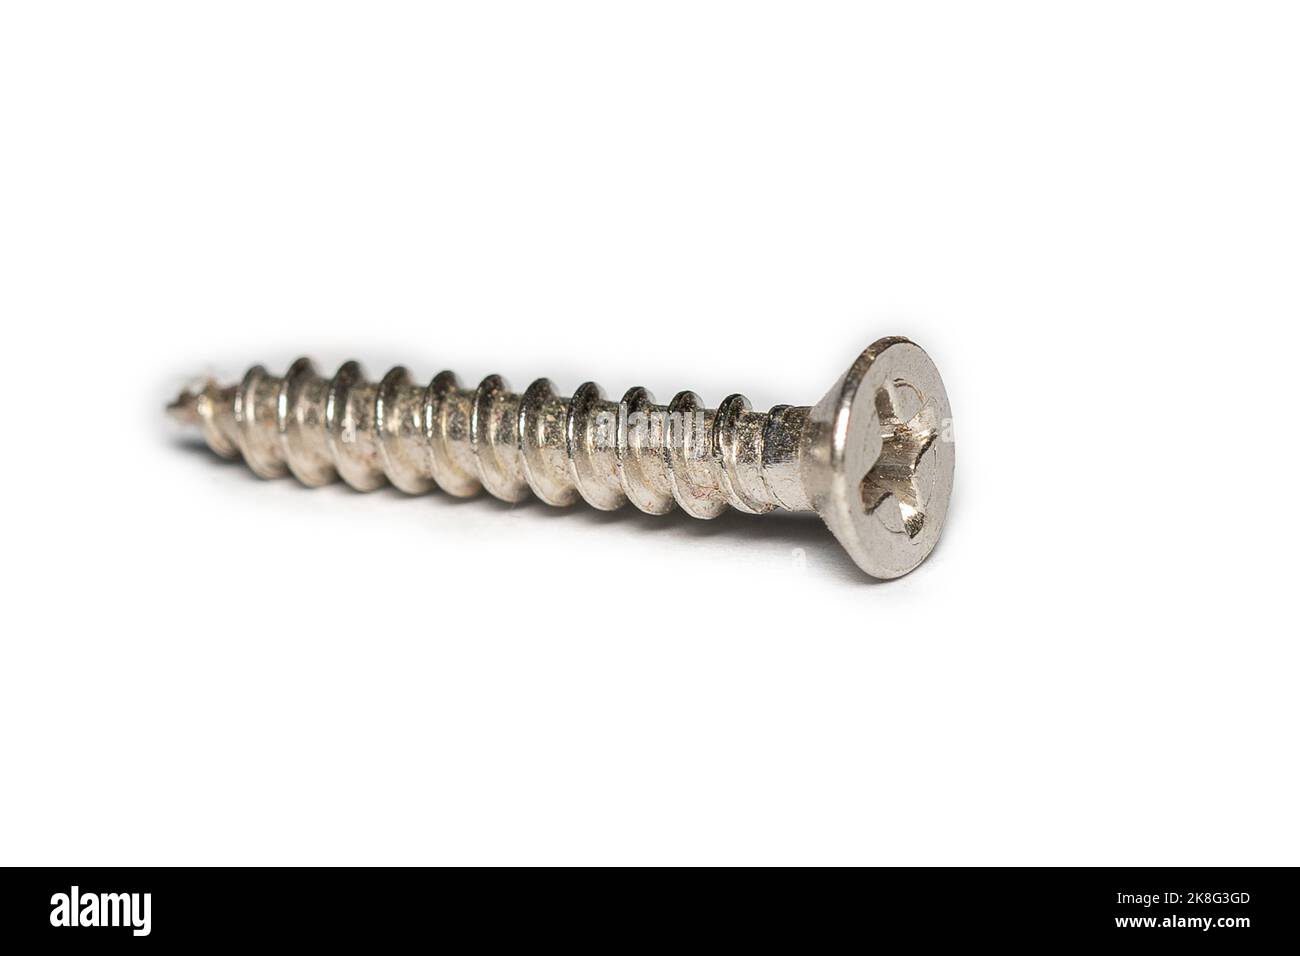 Old rusted screws on a white background Stock Photo